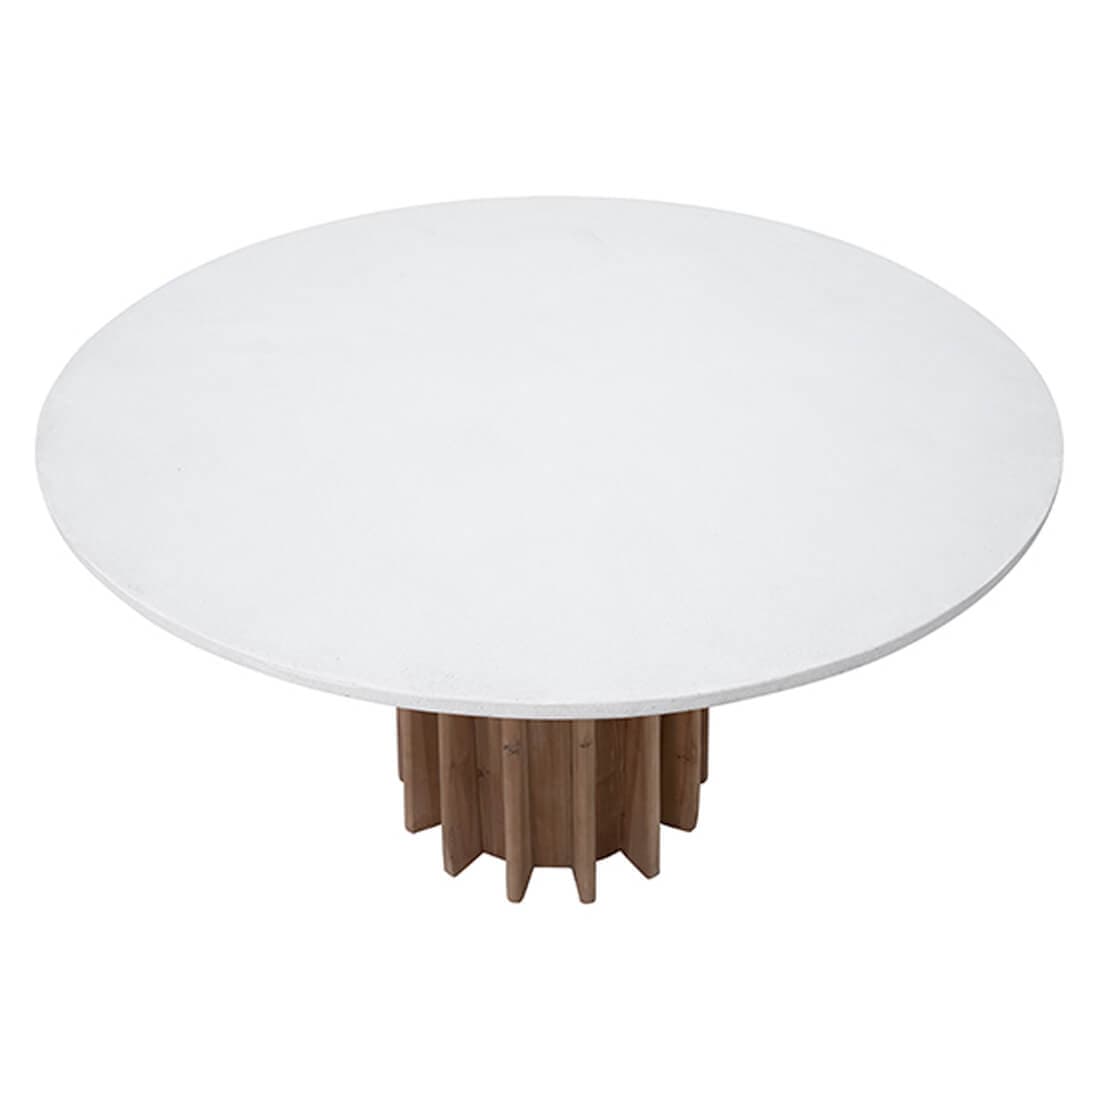 Adonis Dining Table, White Concrete – High Fashion Home